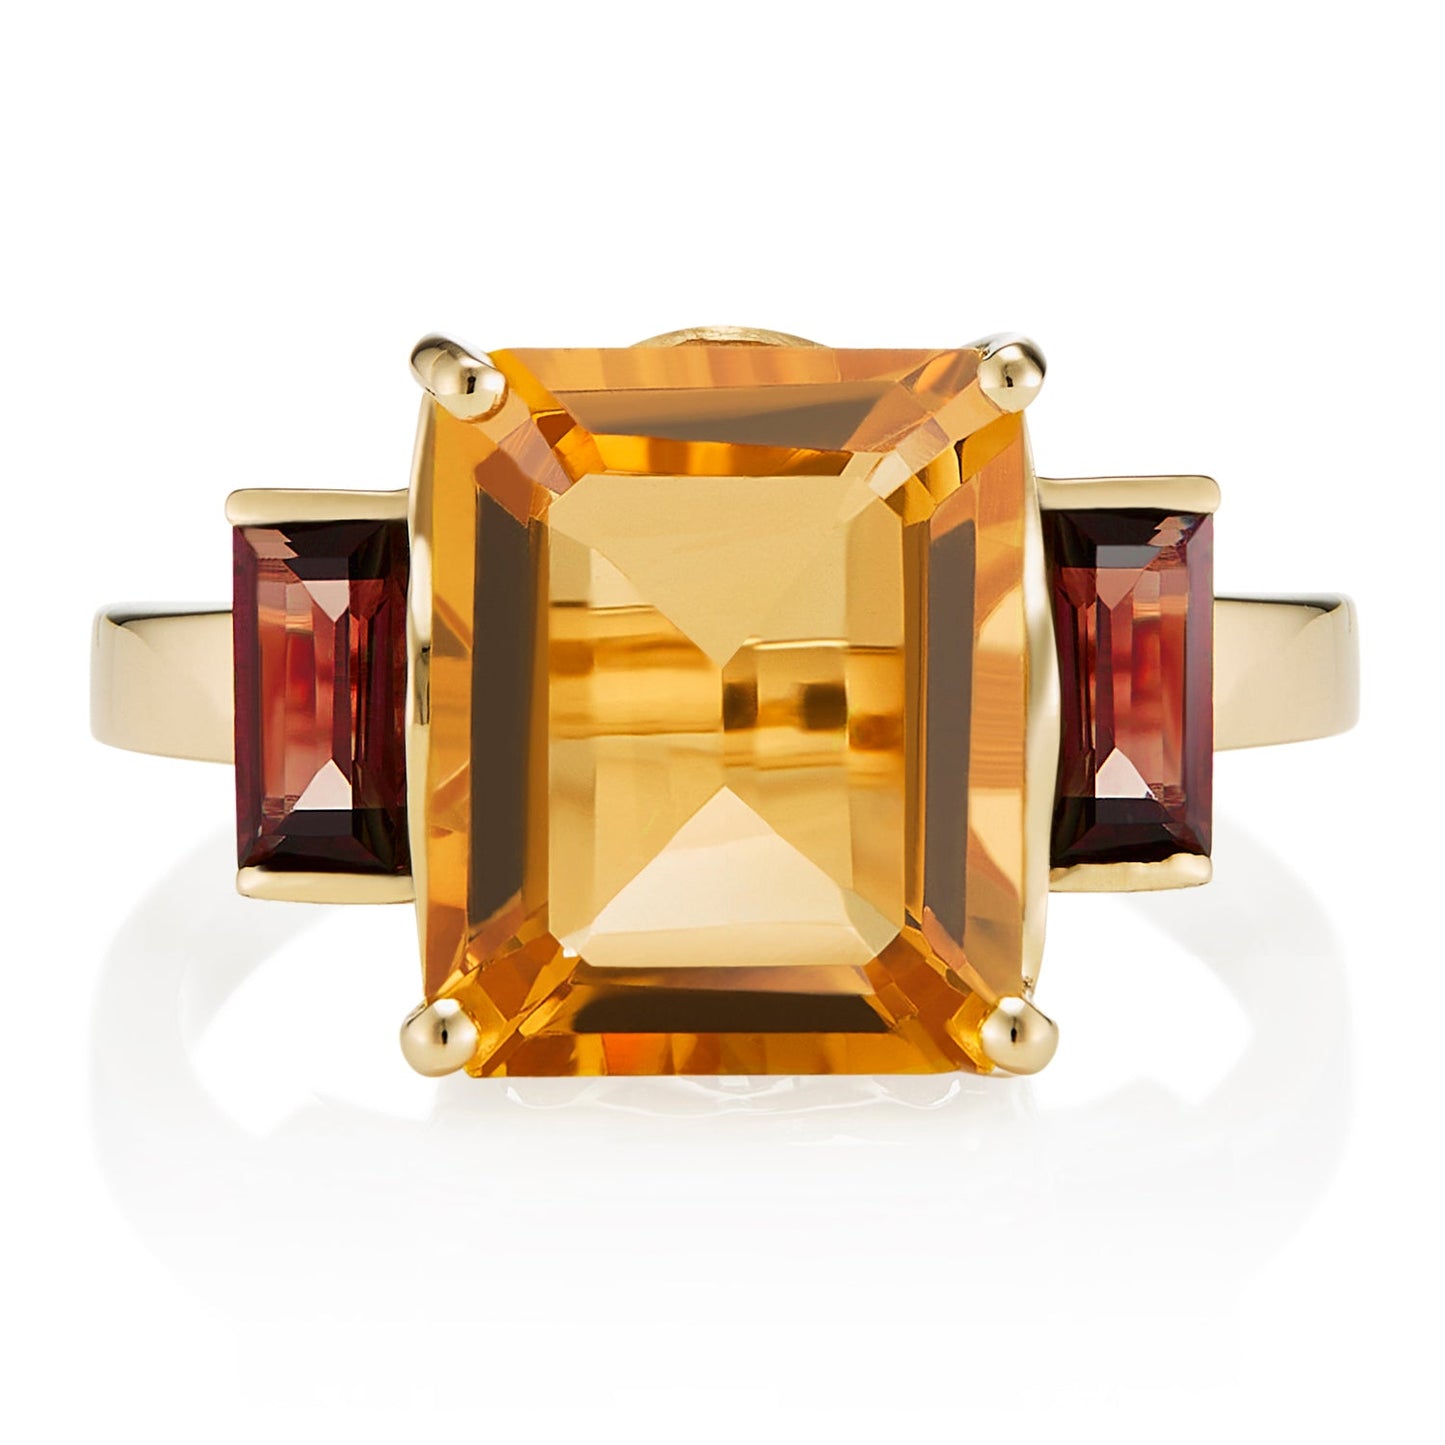 London- made luxury custom gold jewellery -9ct Yellow Gold Octagon Ring in Garnet and Citrine – Andalusian Collection, Augustine Jewellery, British Jewellers, Gemstone Jewellery, Luxury Jewellery London.